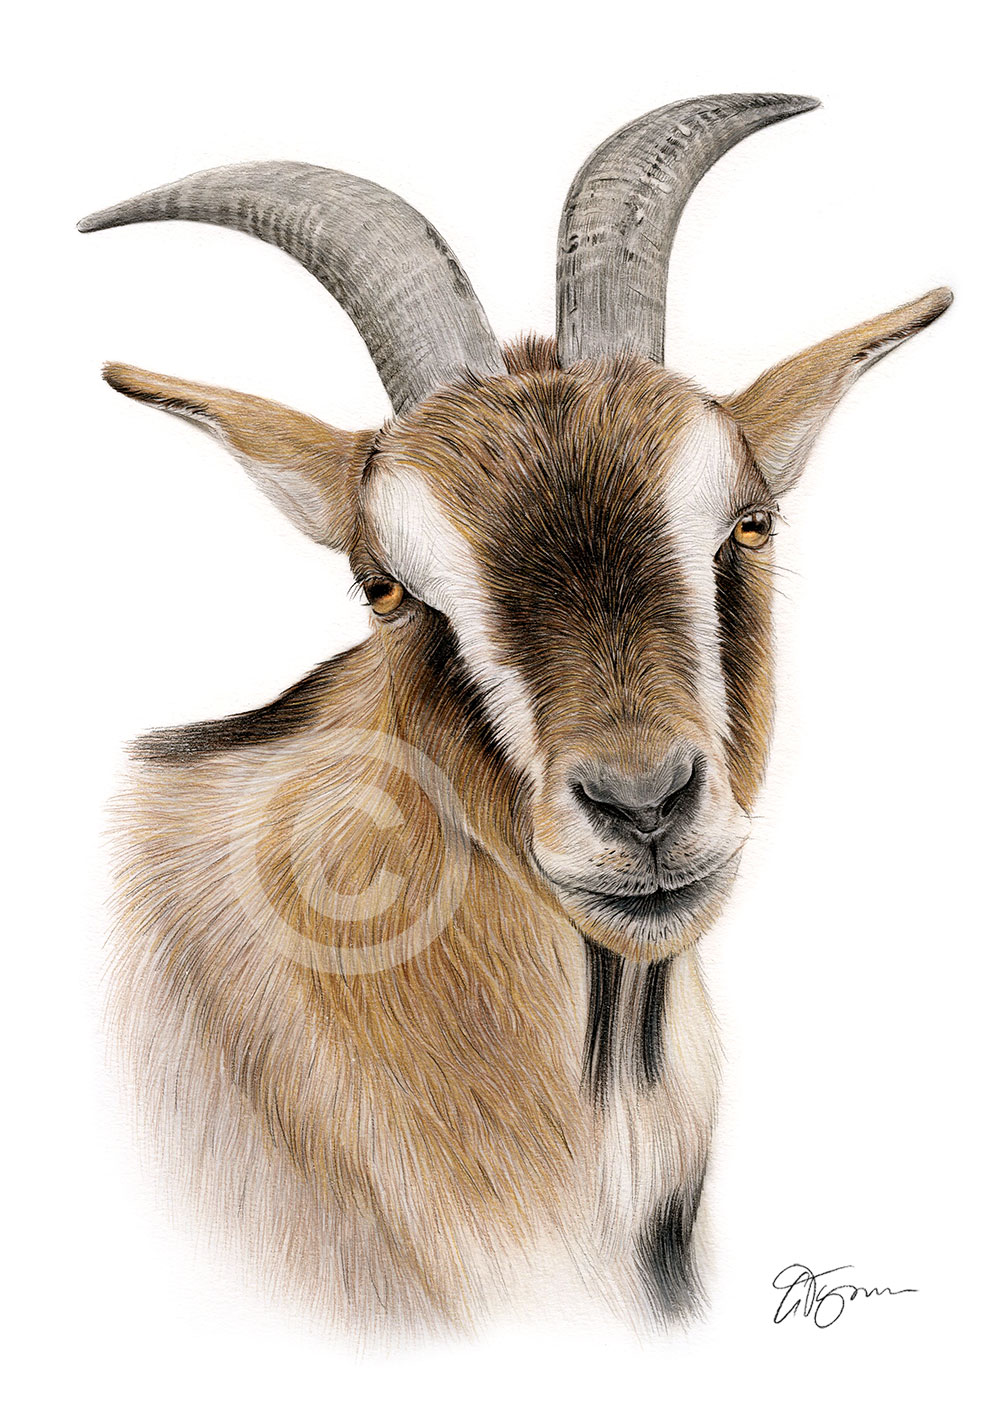 Colour pencil drawing of a goat by artist Gary Tymon